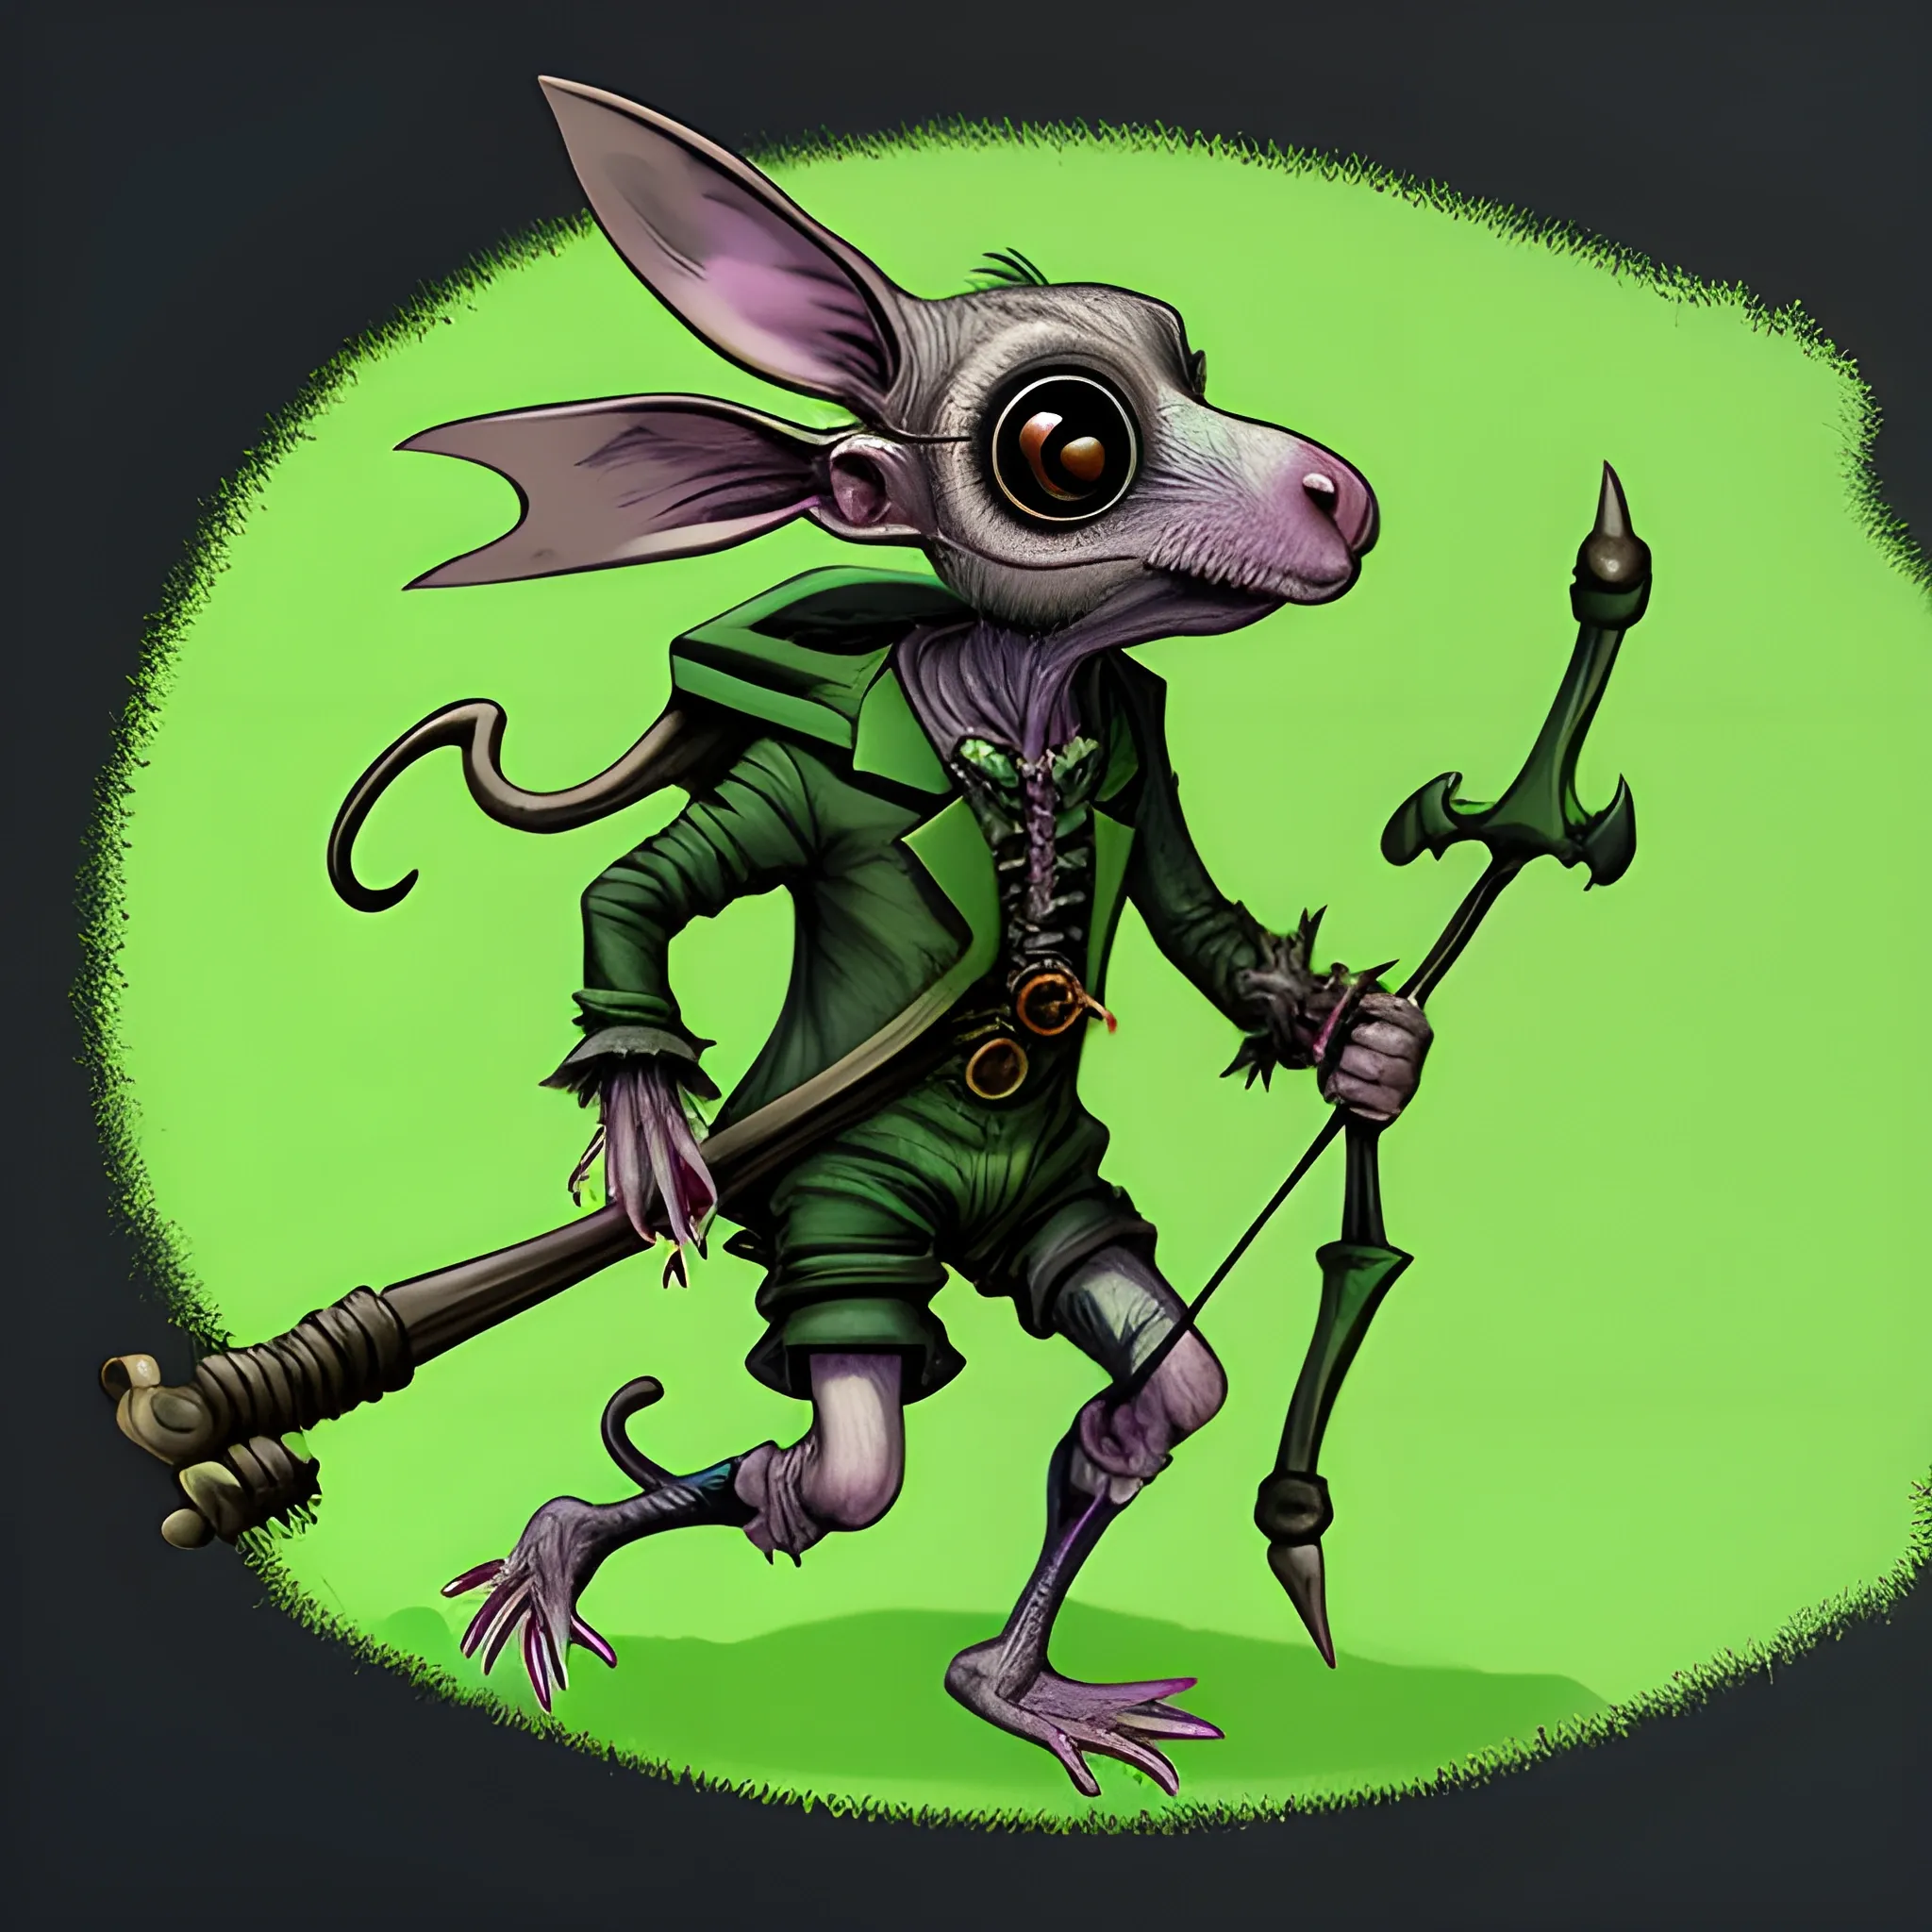 Humanoid Rat Creature, Carries A Poisonous Crossbow, Consumed By A Poison Cloud, Wearing Eye Goggles, And A Green Suit